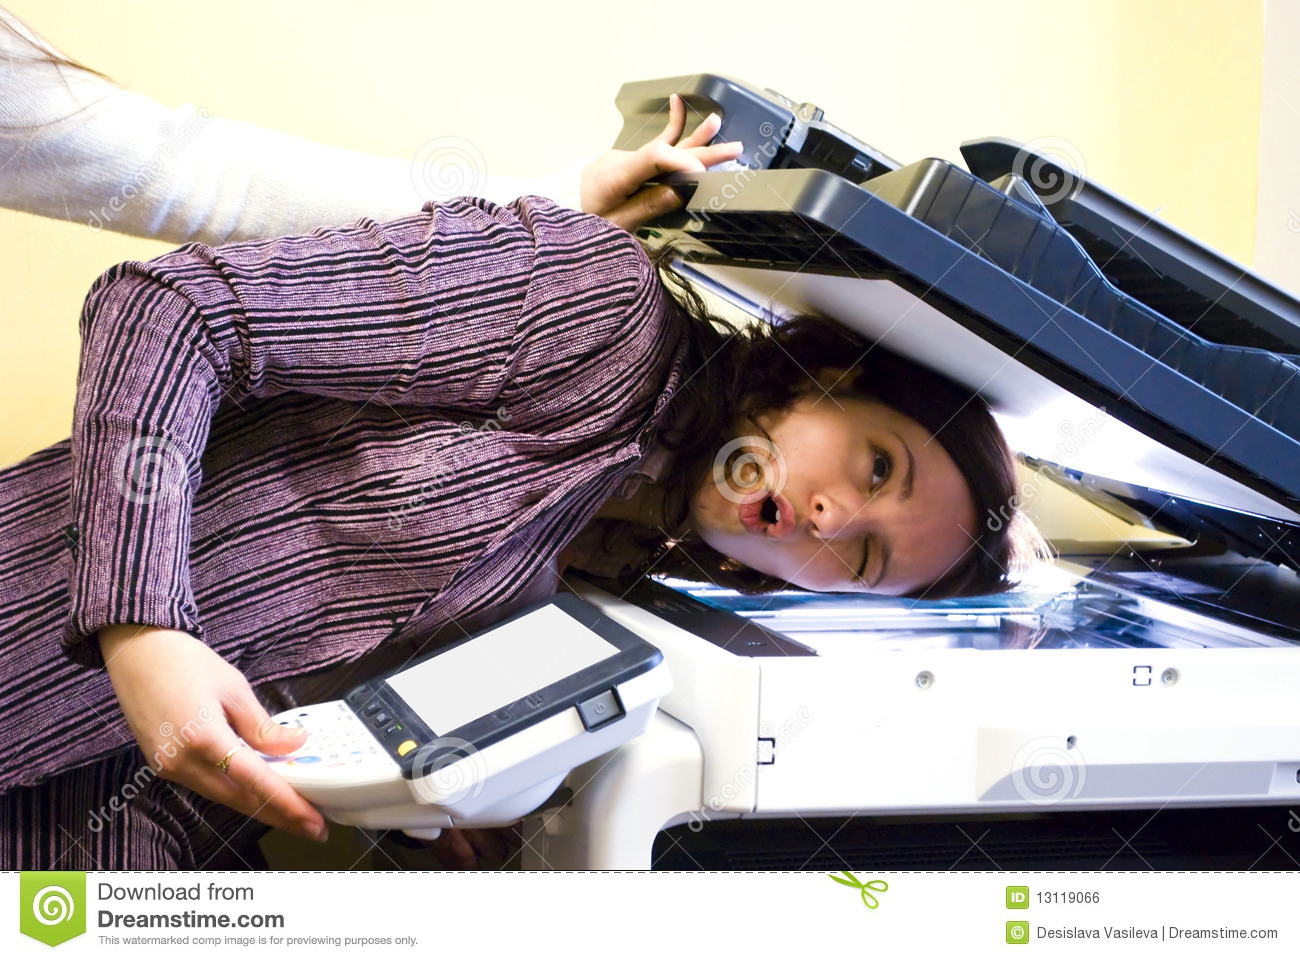 Fun With The Copier Royalty Free Stock Image   Image  13119066